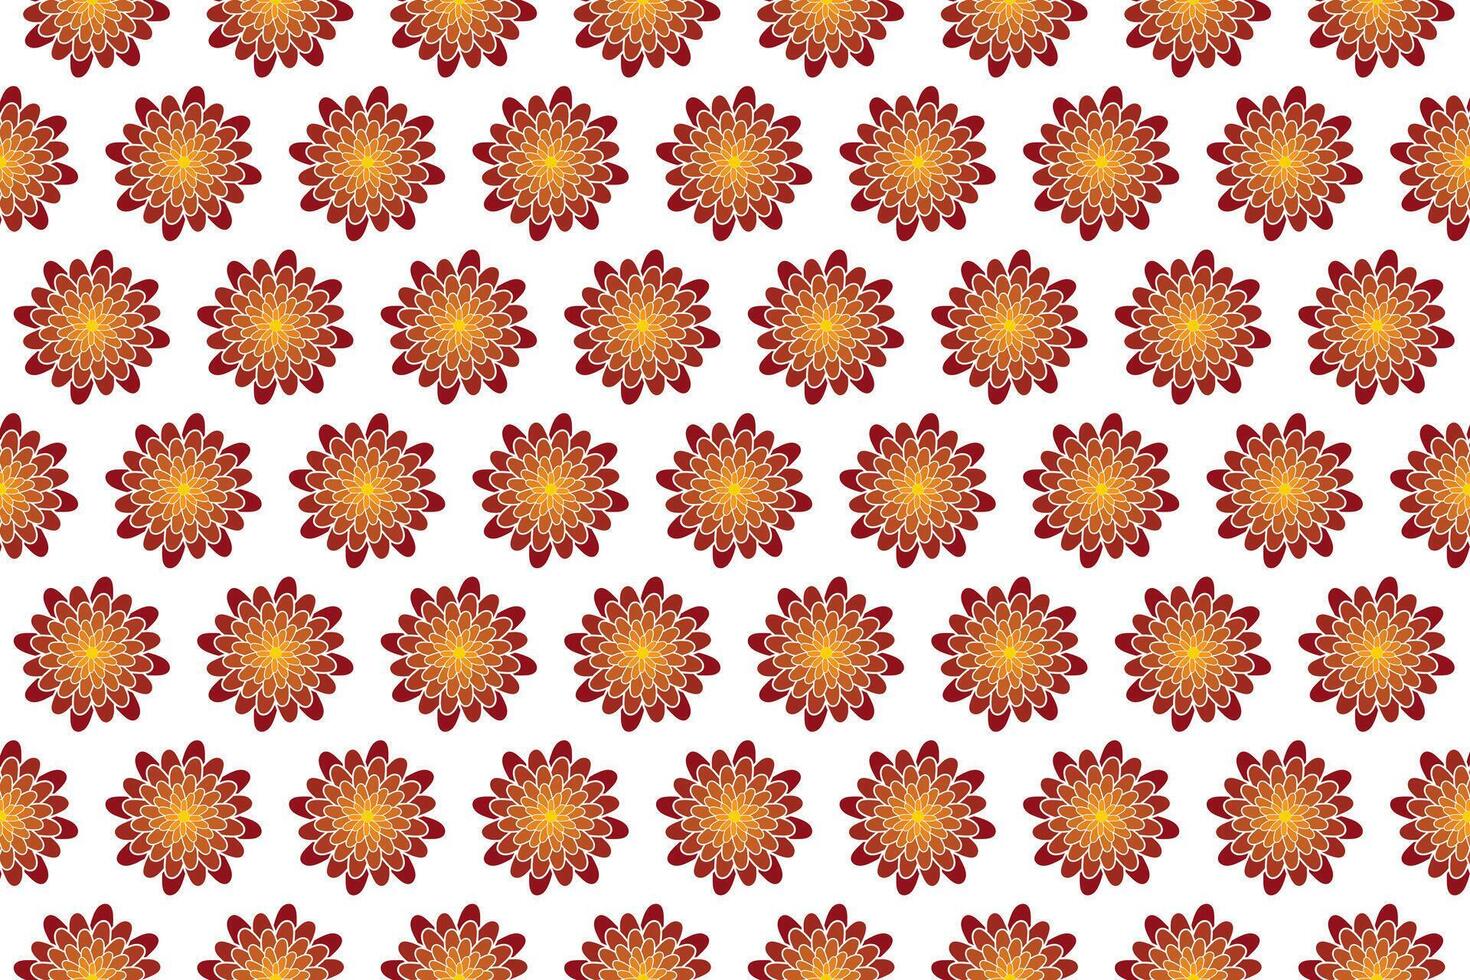 Illustration wallpaper of Abstract flower on white background. vector